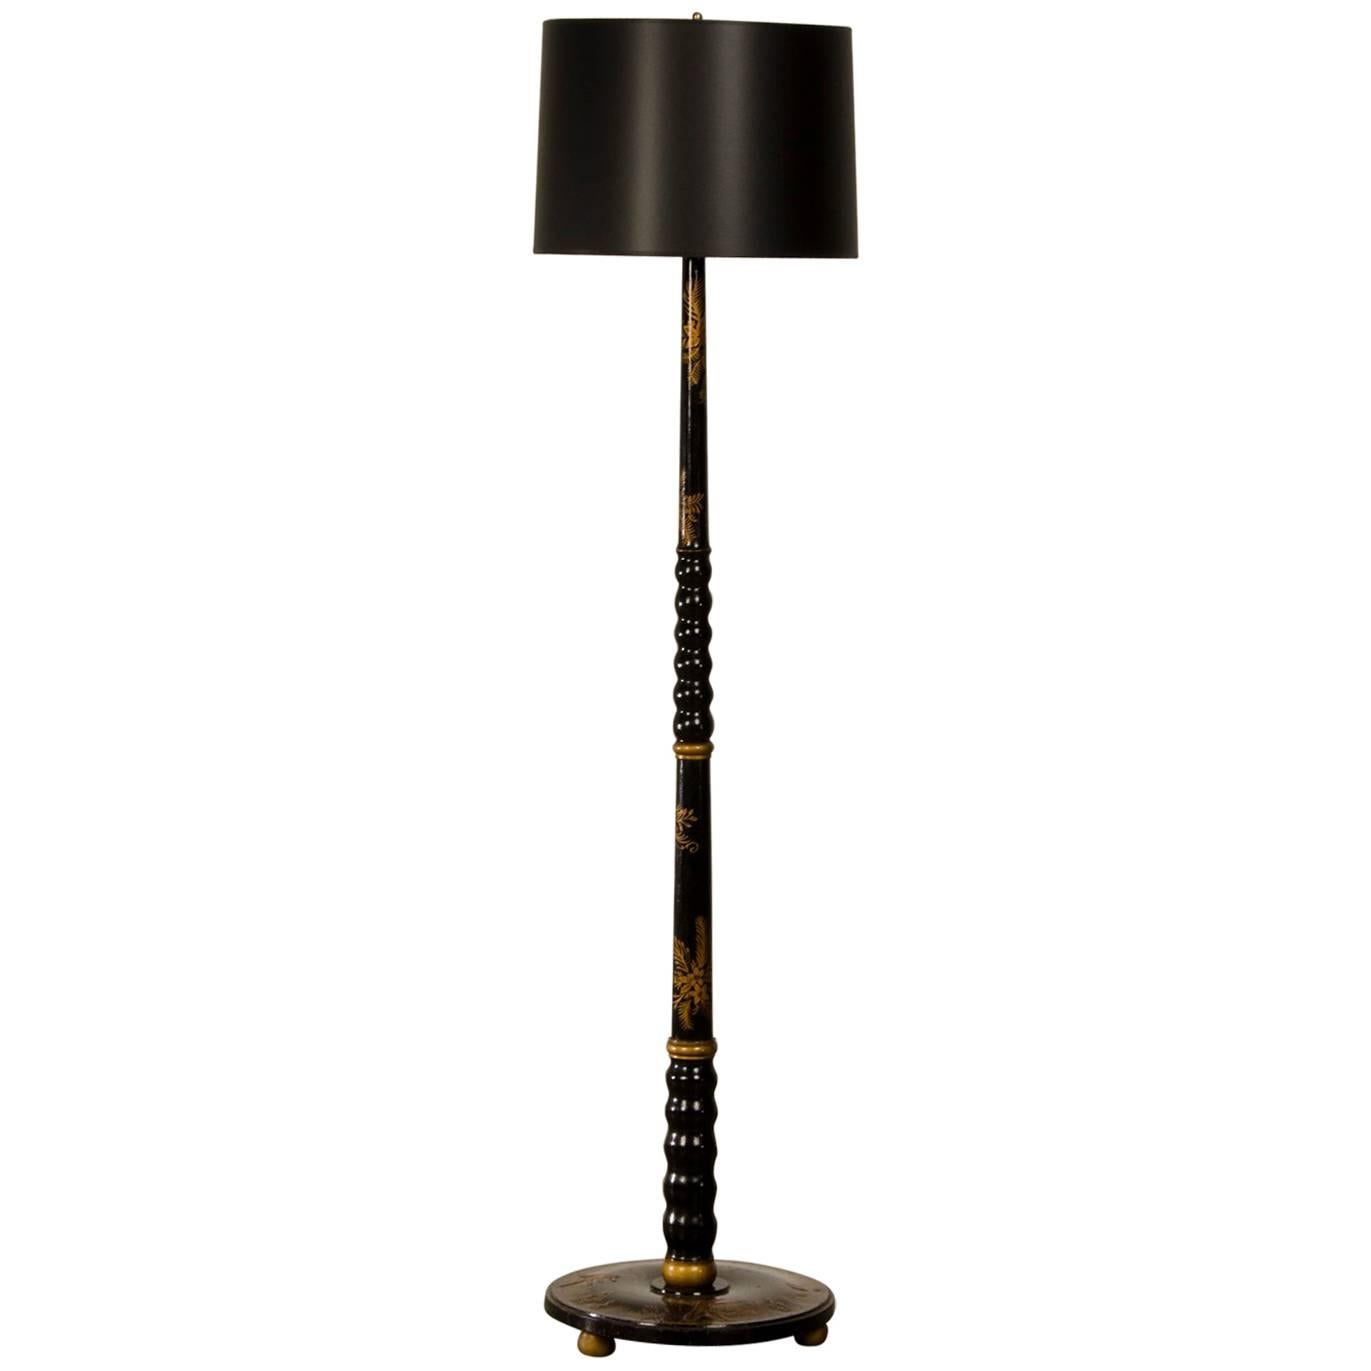 Antique English Chinoiserie Lacquered Floor Lamp Edwardian England, circa 1910